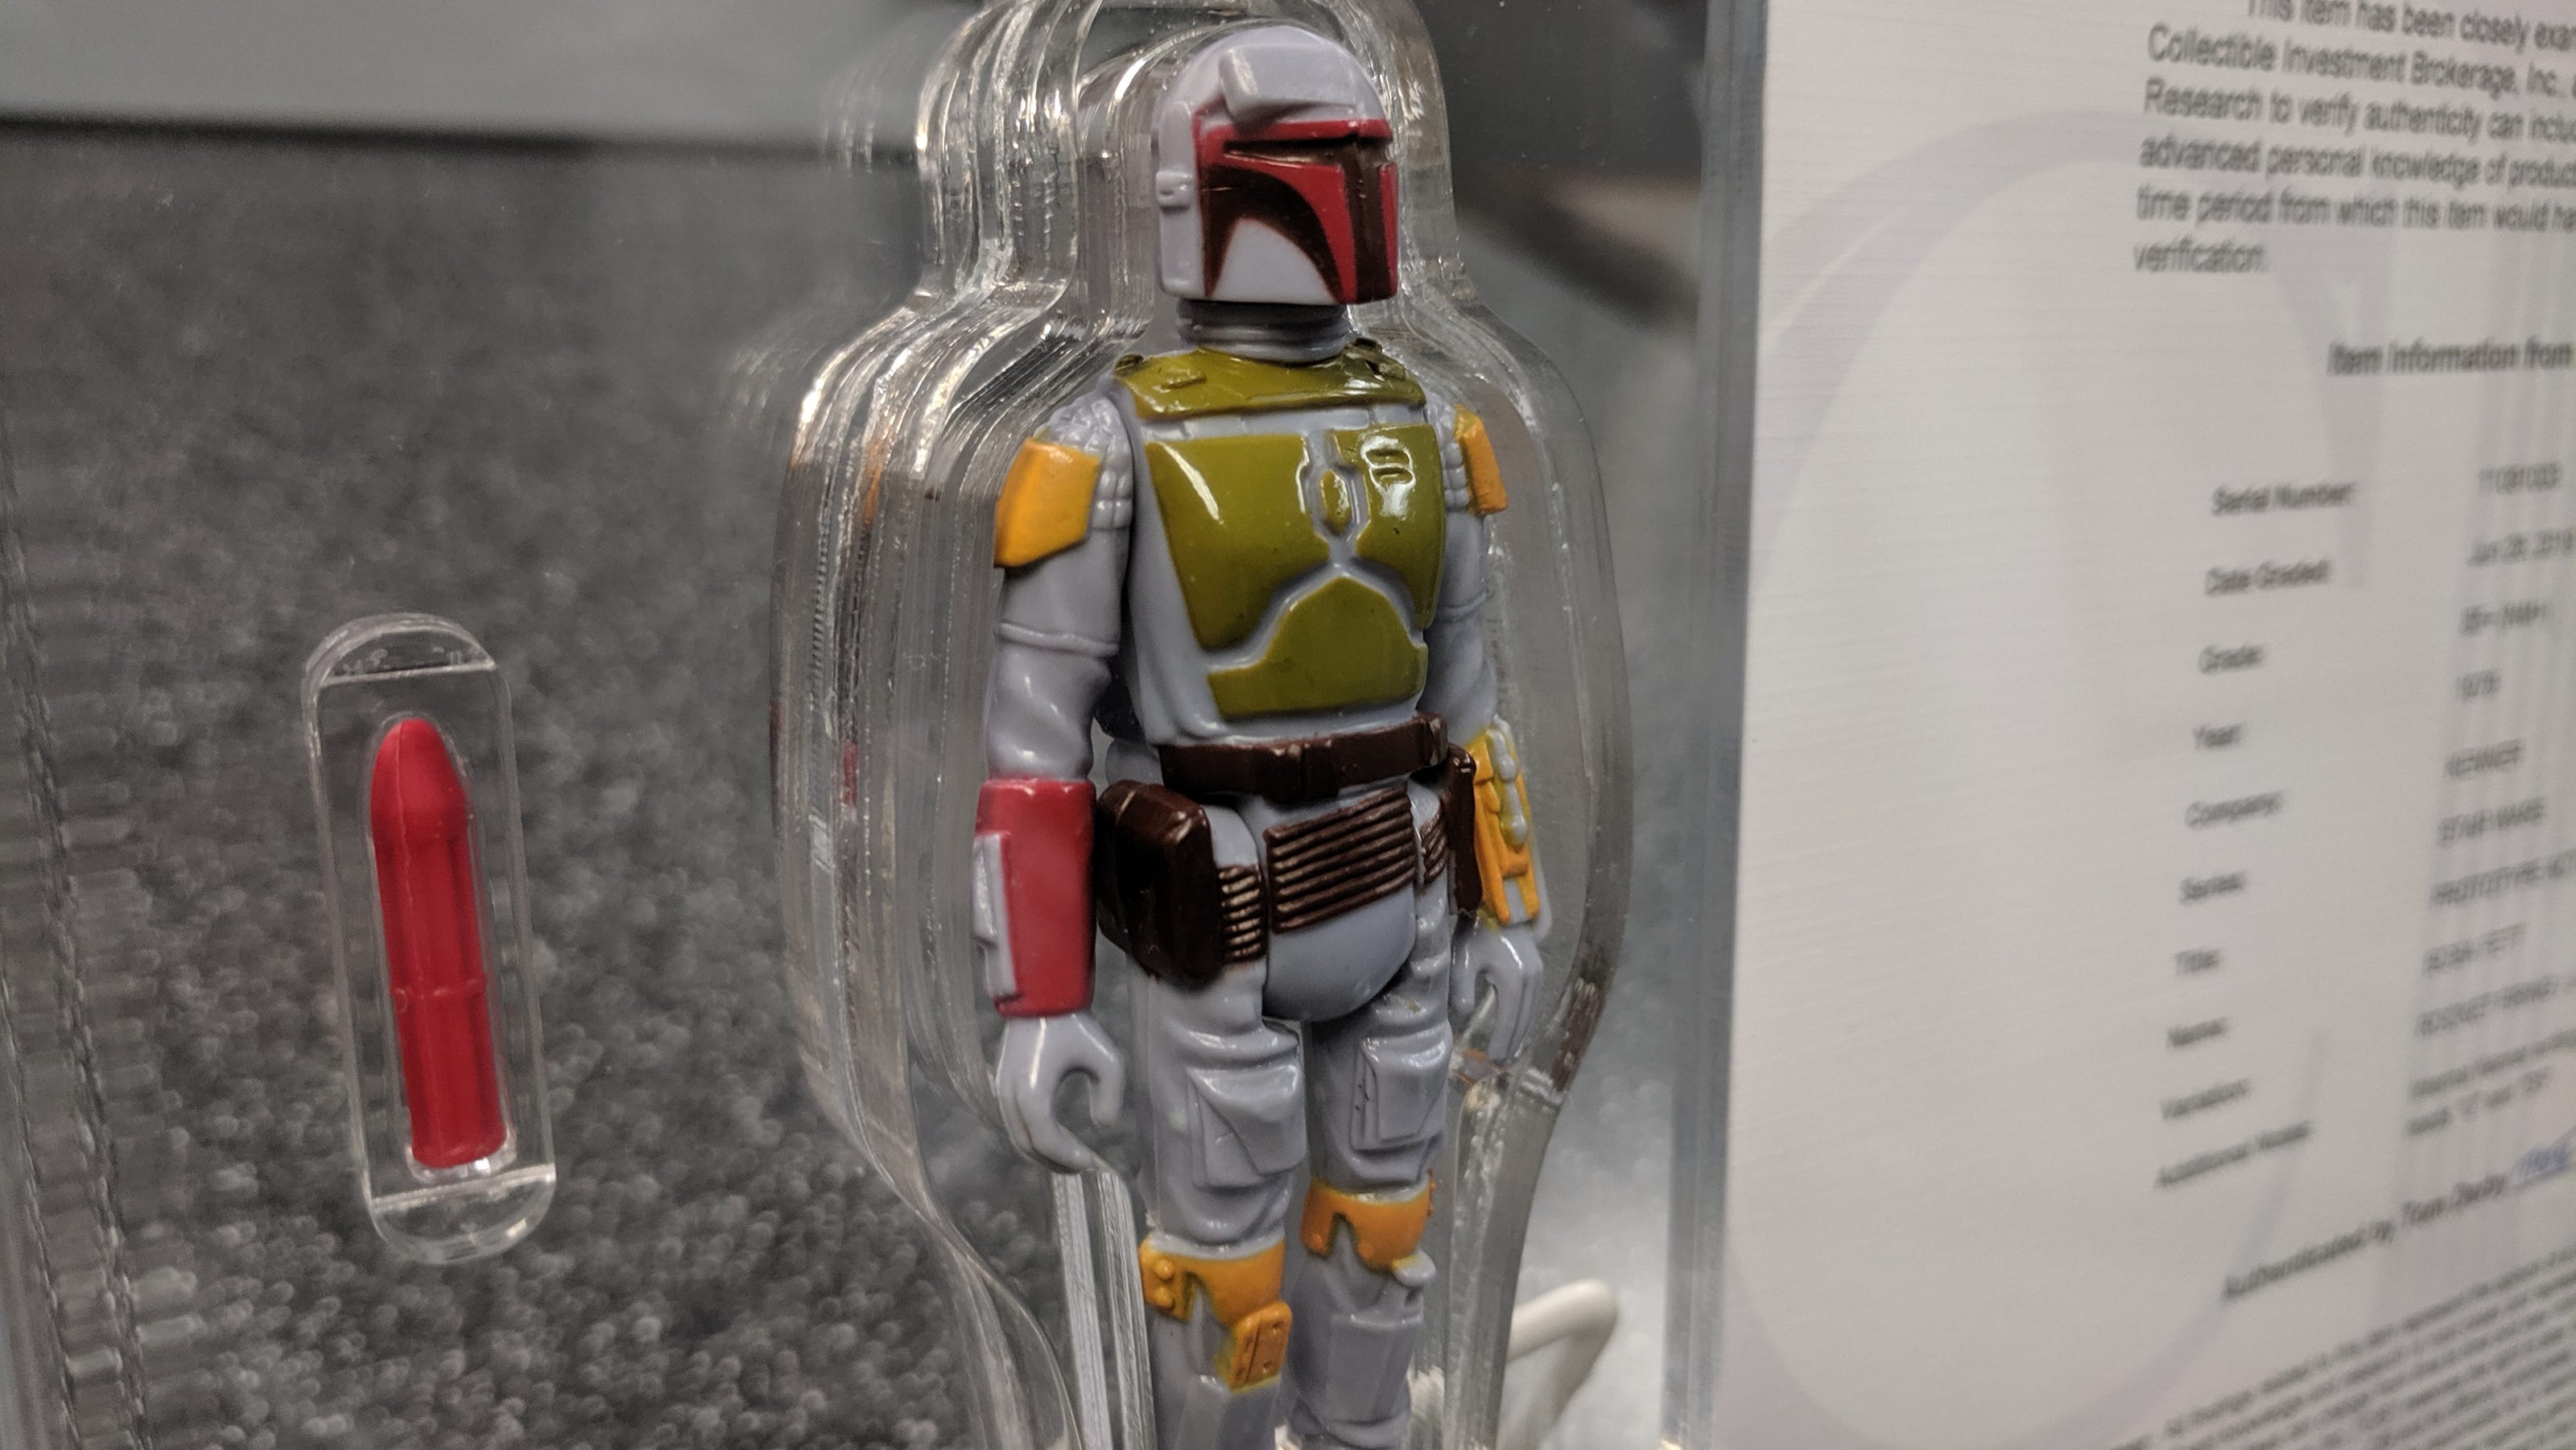 Star Wars Boba Fett Action Figure Breaks World Record At Auction